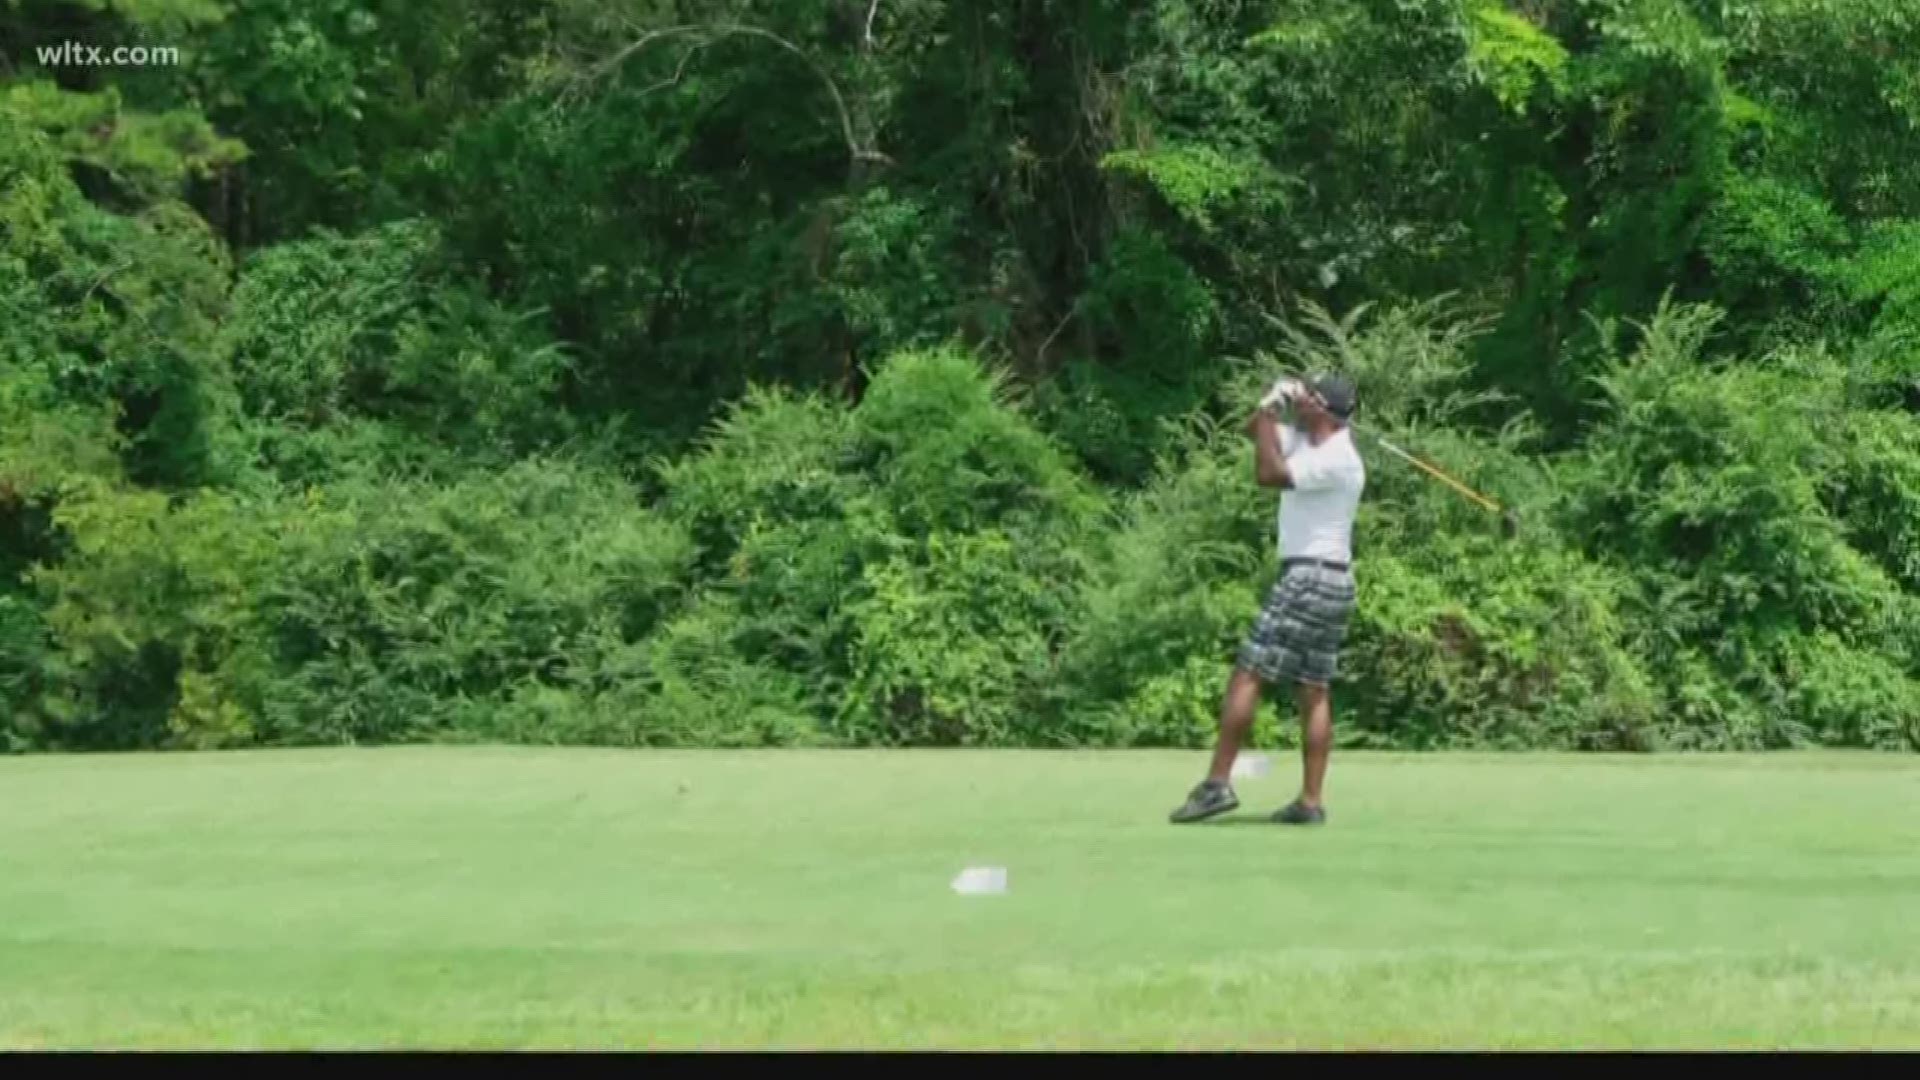 Men of Hope is a local organization that raises money to help students in need.  Brandon Taylor sat down with two organizers of an upcoming golf tournament to benefit the organization